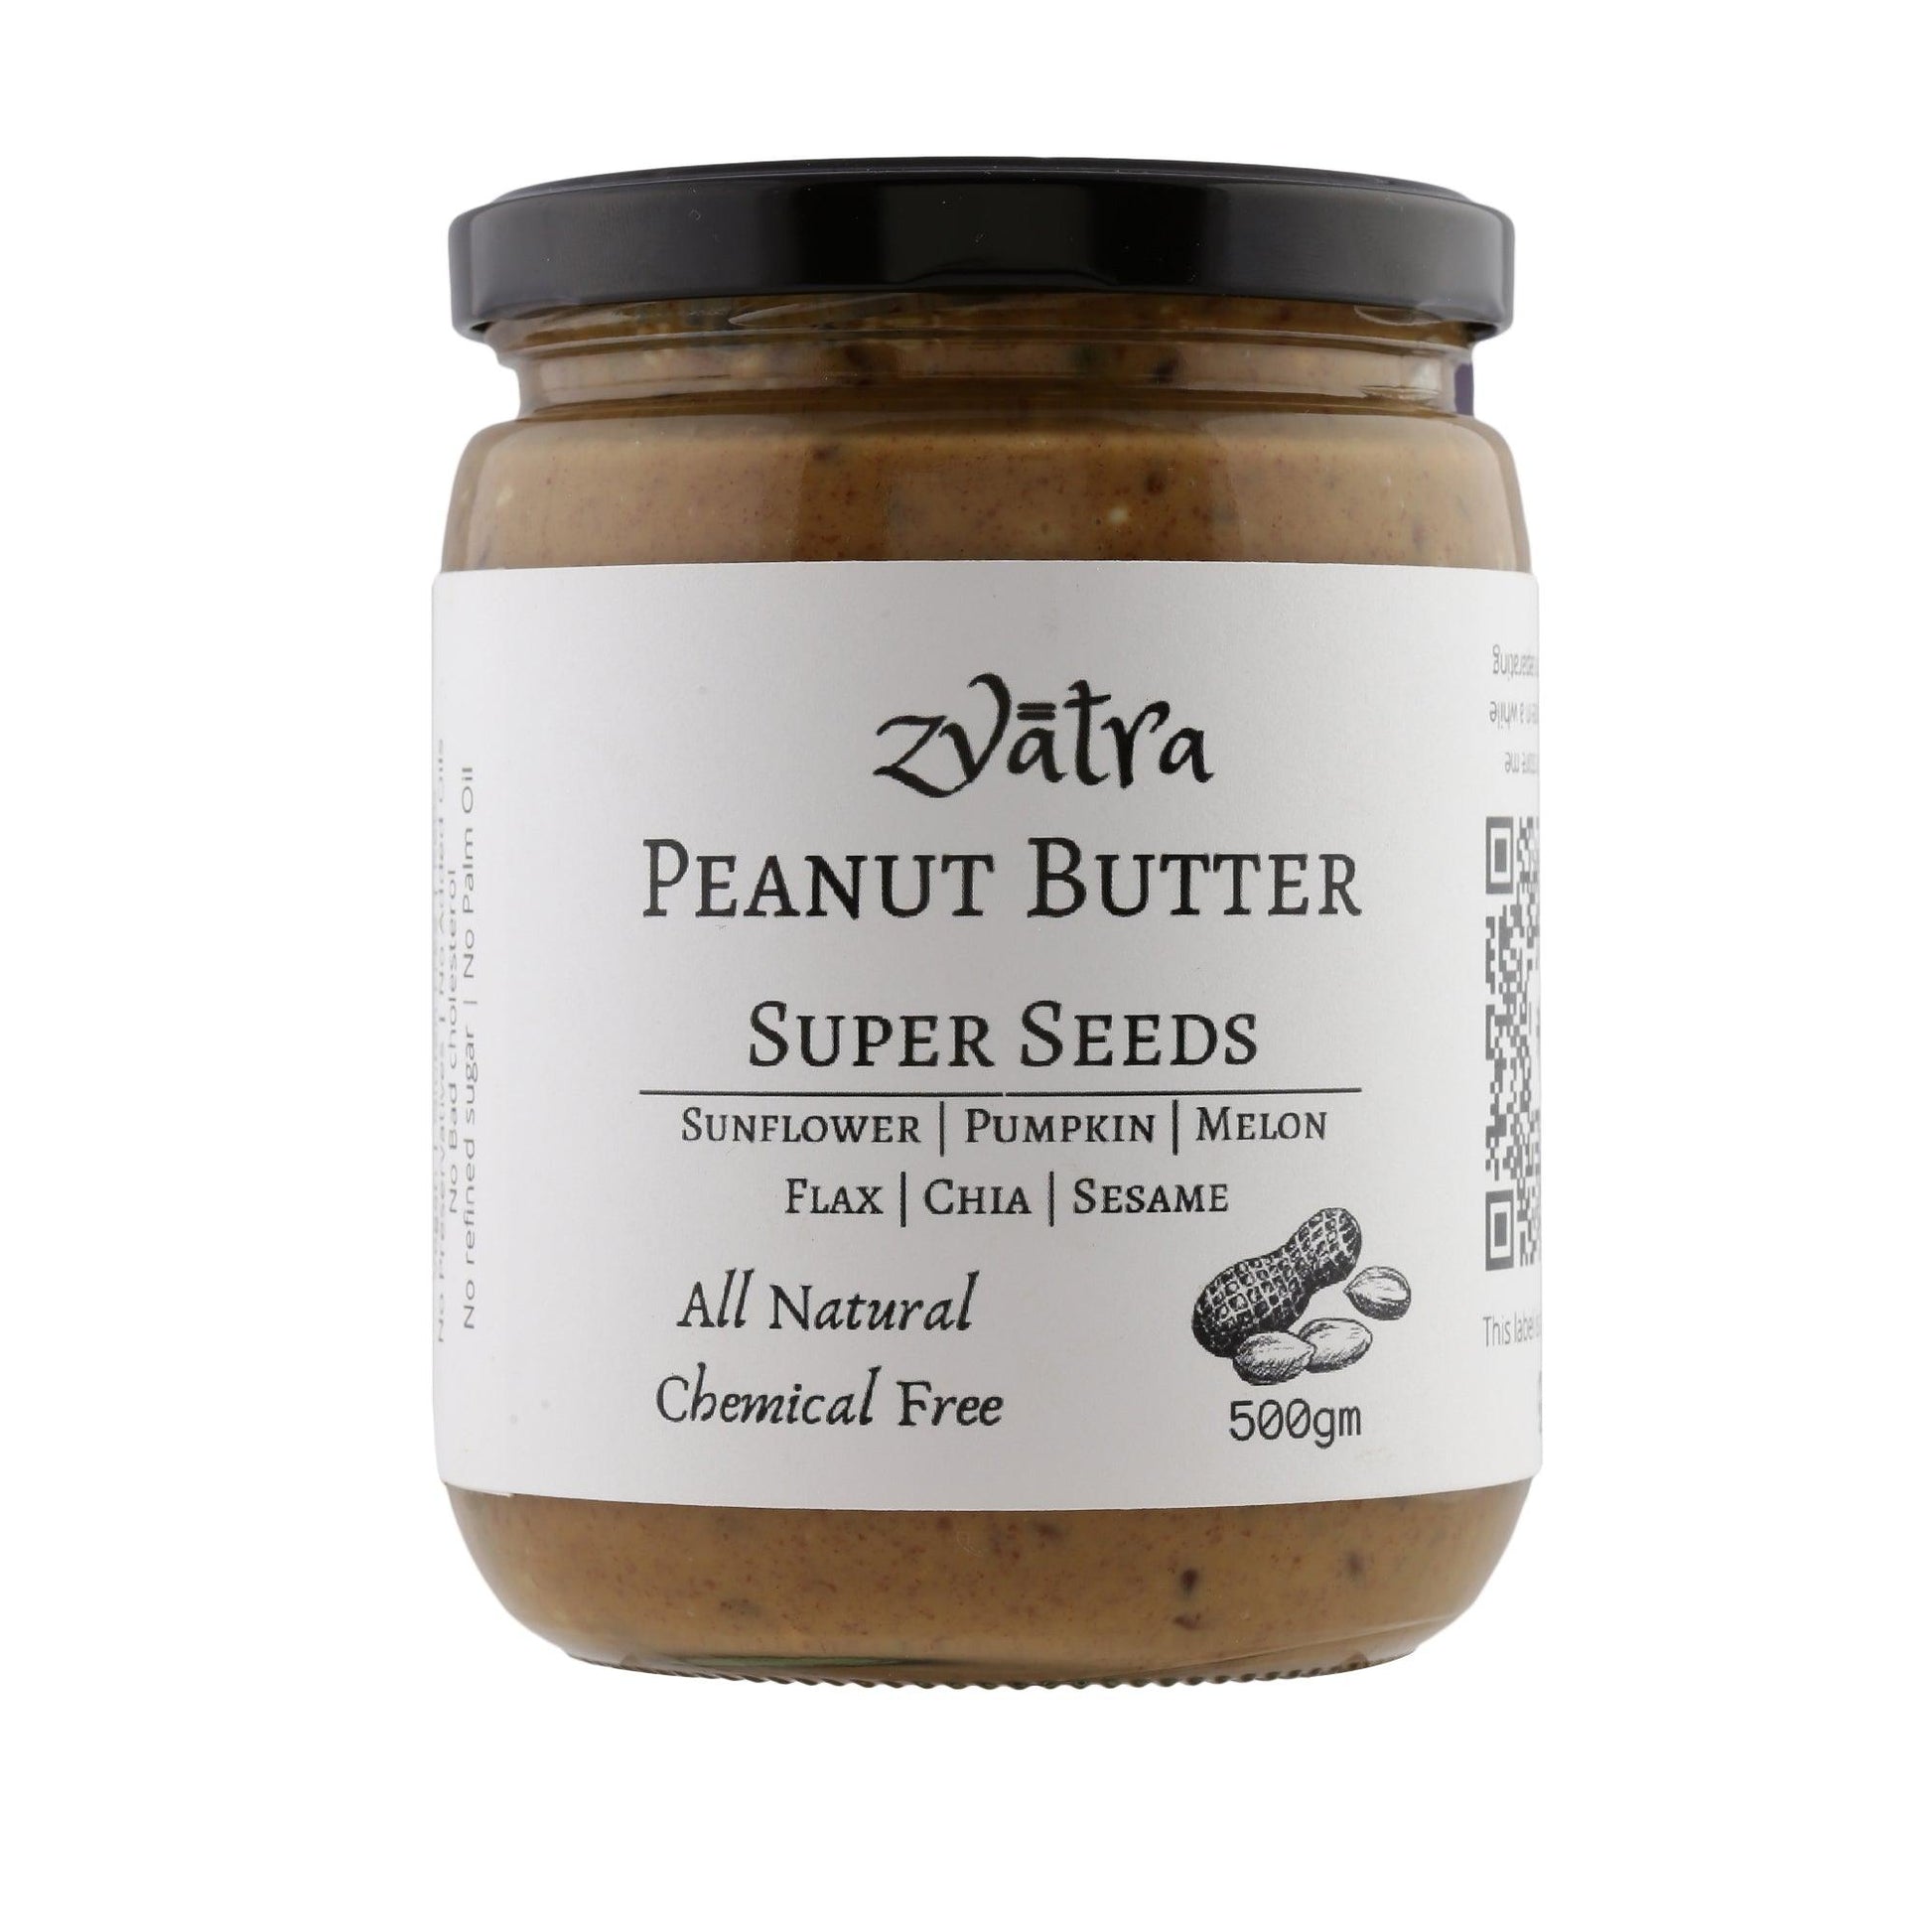 Peanut Butter - Super Seeds - Sweetened with Jaggery - Wildermart